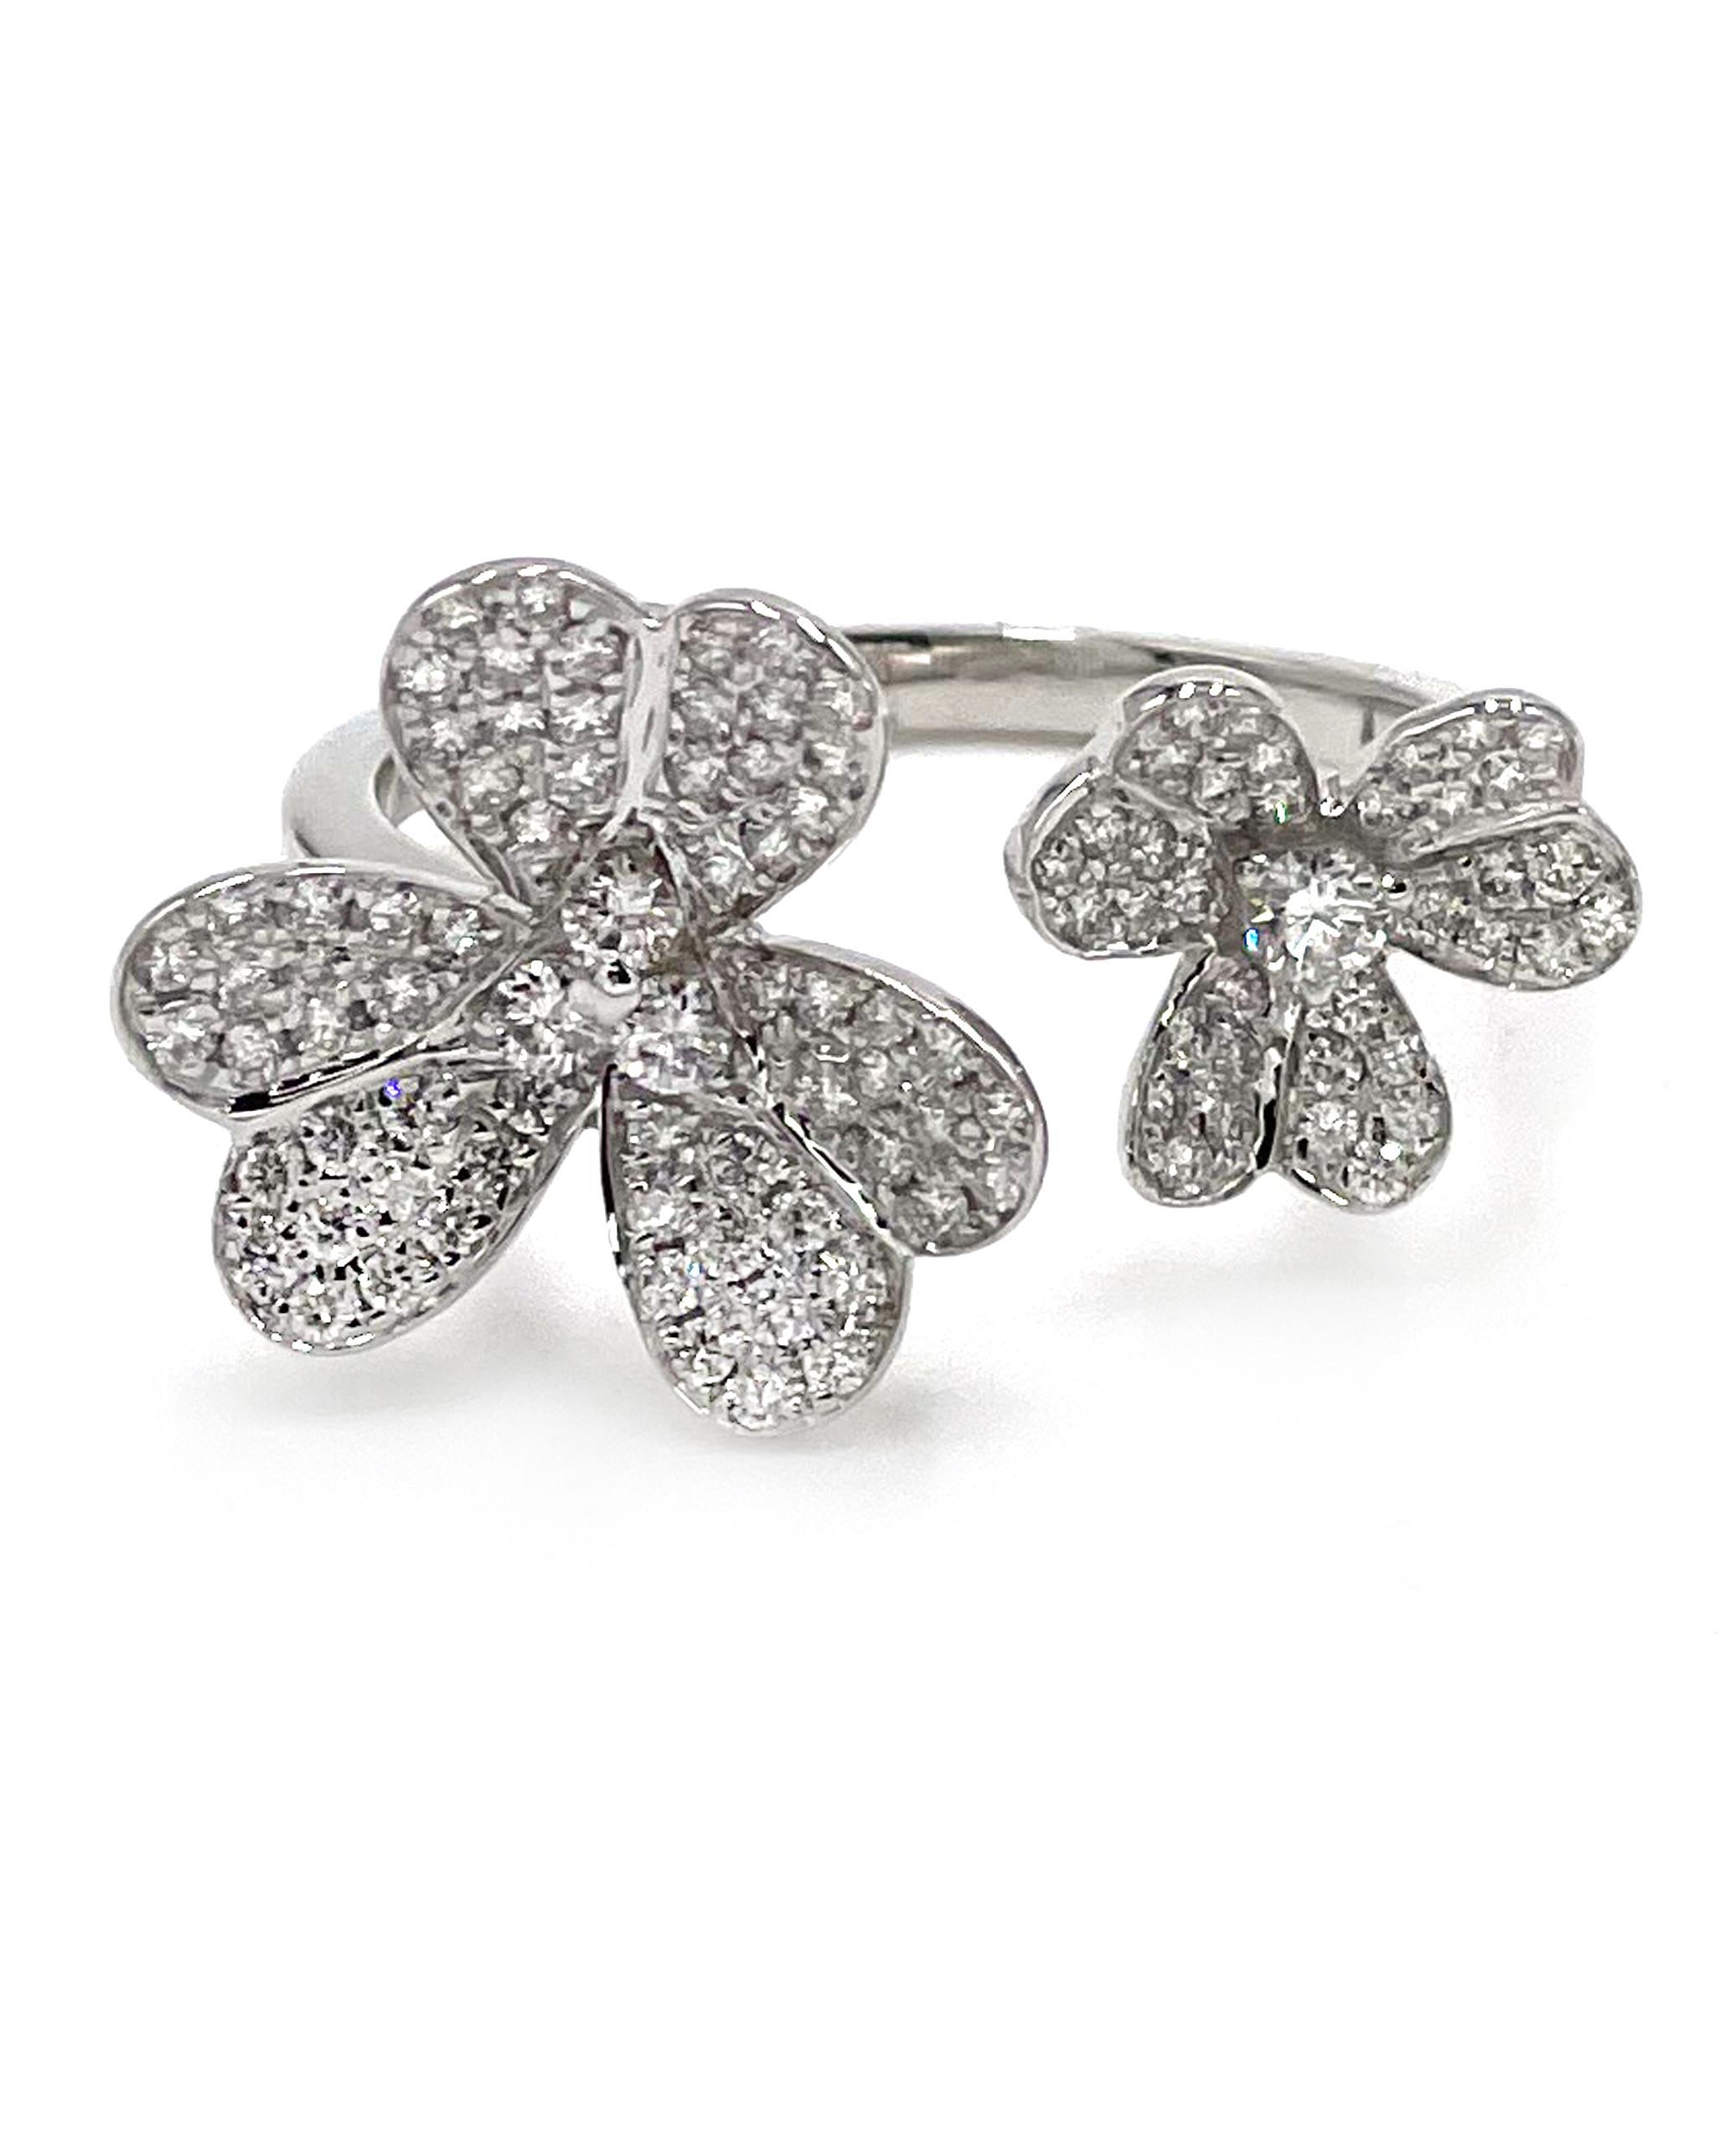 Just in time for Spring! This 18K white gold flower ring is furnished with round pave set diamonds with a total weight of 0.62 carat.

* Diamonds are G color, VS2/SI1 clarity
* Finger size 6.5